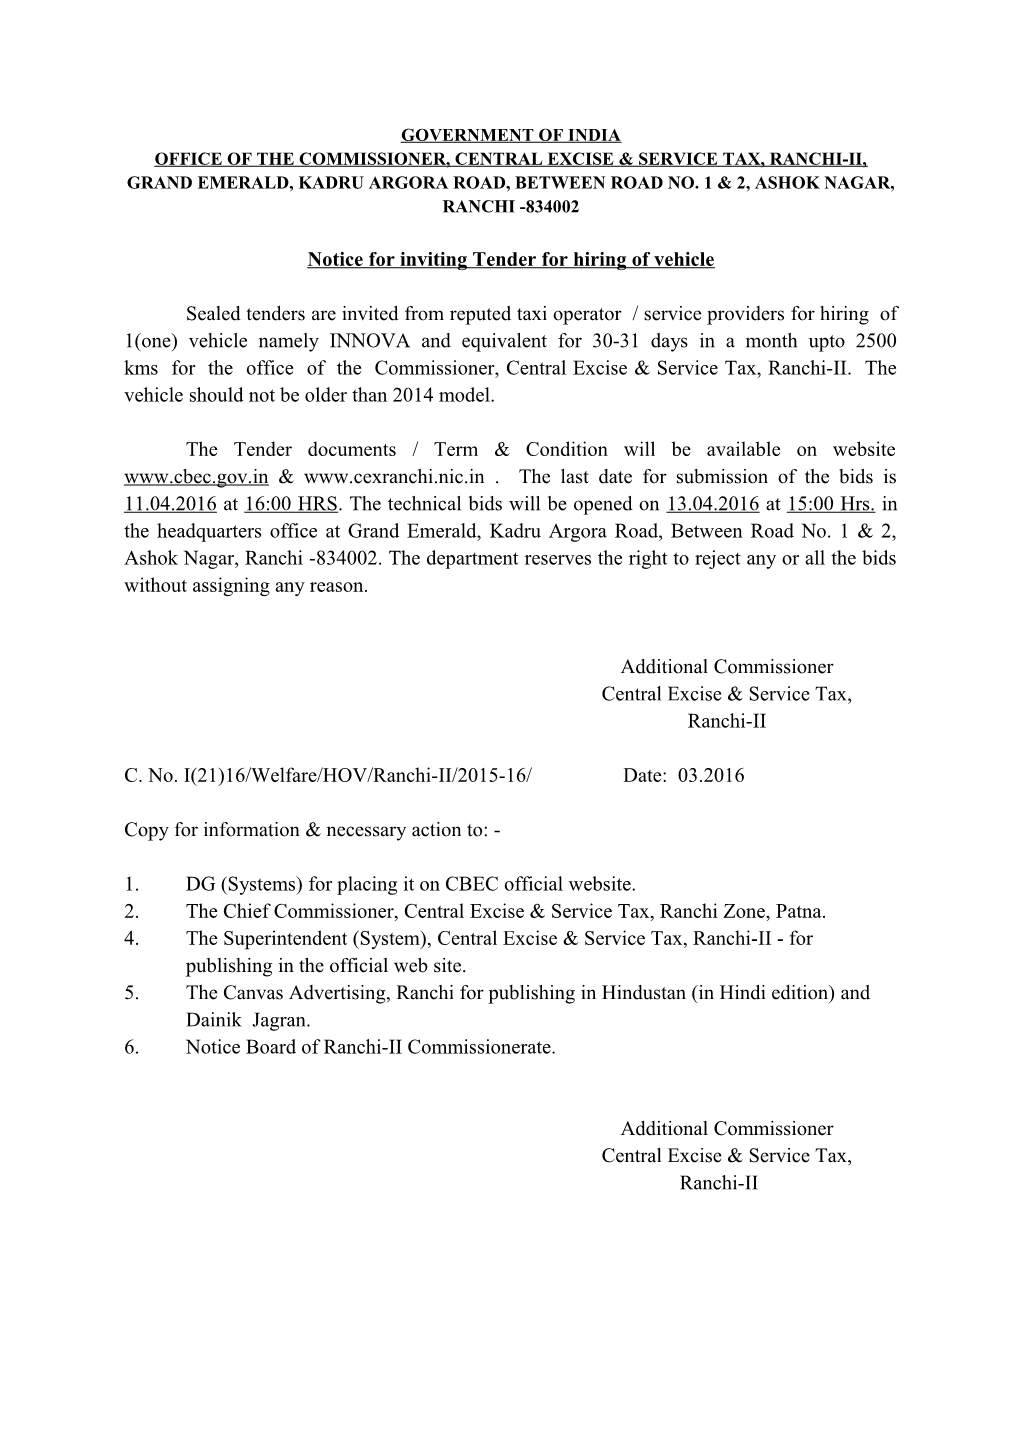 Office of the Commissioner, Central Excise & Service Tax, Ranchi-II